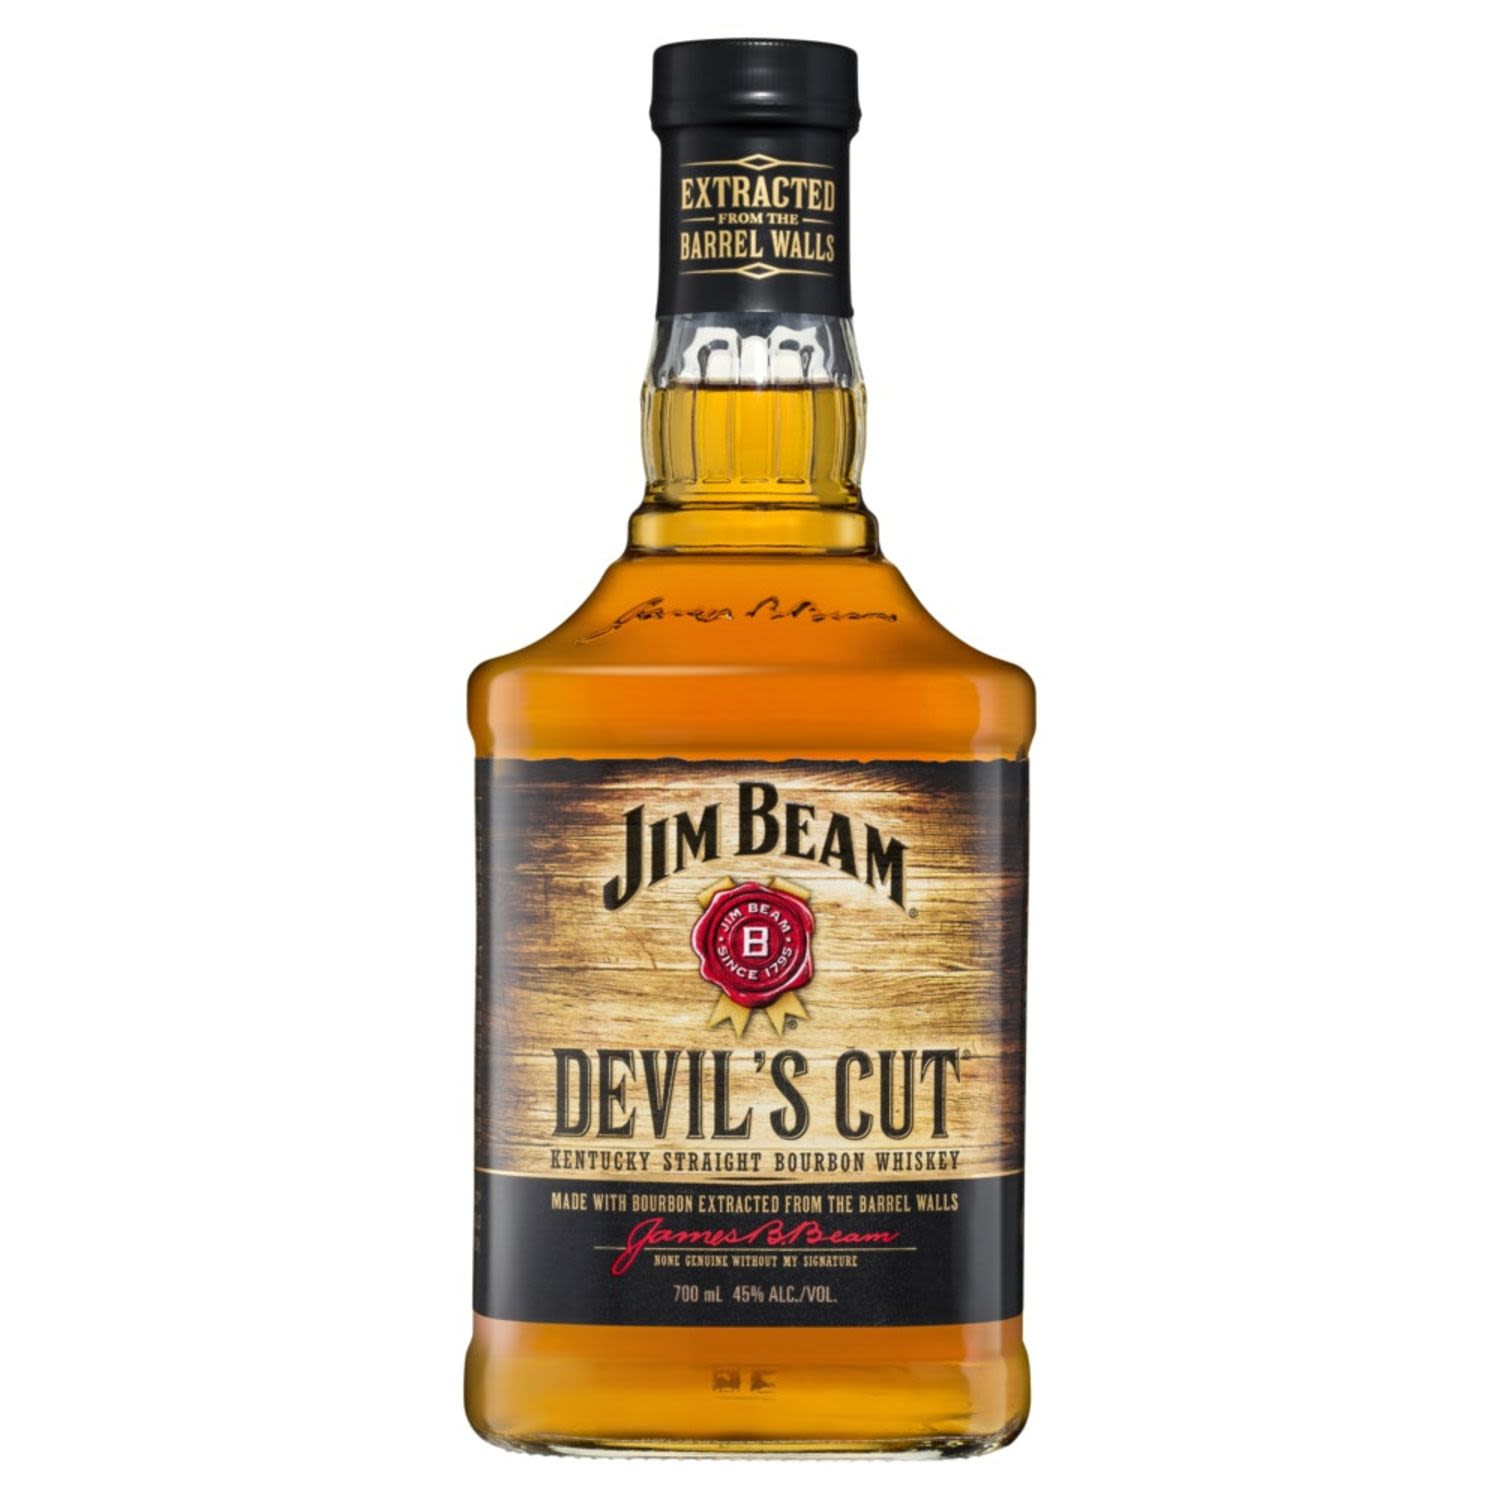 We take the liquid we extract from our barrels, blend it with extra-aged Kentucky straight bourbon whiskey and bottle it at 90 proof to create a premium bourbon with extra depth and complexity. Designed to be enjoyed neat or on the rocks, Jim Beam Devil’s Cut has a robust flavour with deep colour, aroma and character.<br /> <br />Alcohol Volume: 40.00%<br /><br />Pack Format: Bottle<br /><br />Standard Drinks: 22.3<br /><br />Pack Type: Bottle<br /><br />Country of Origin: USA<br />